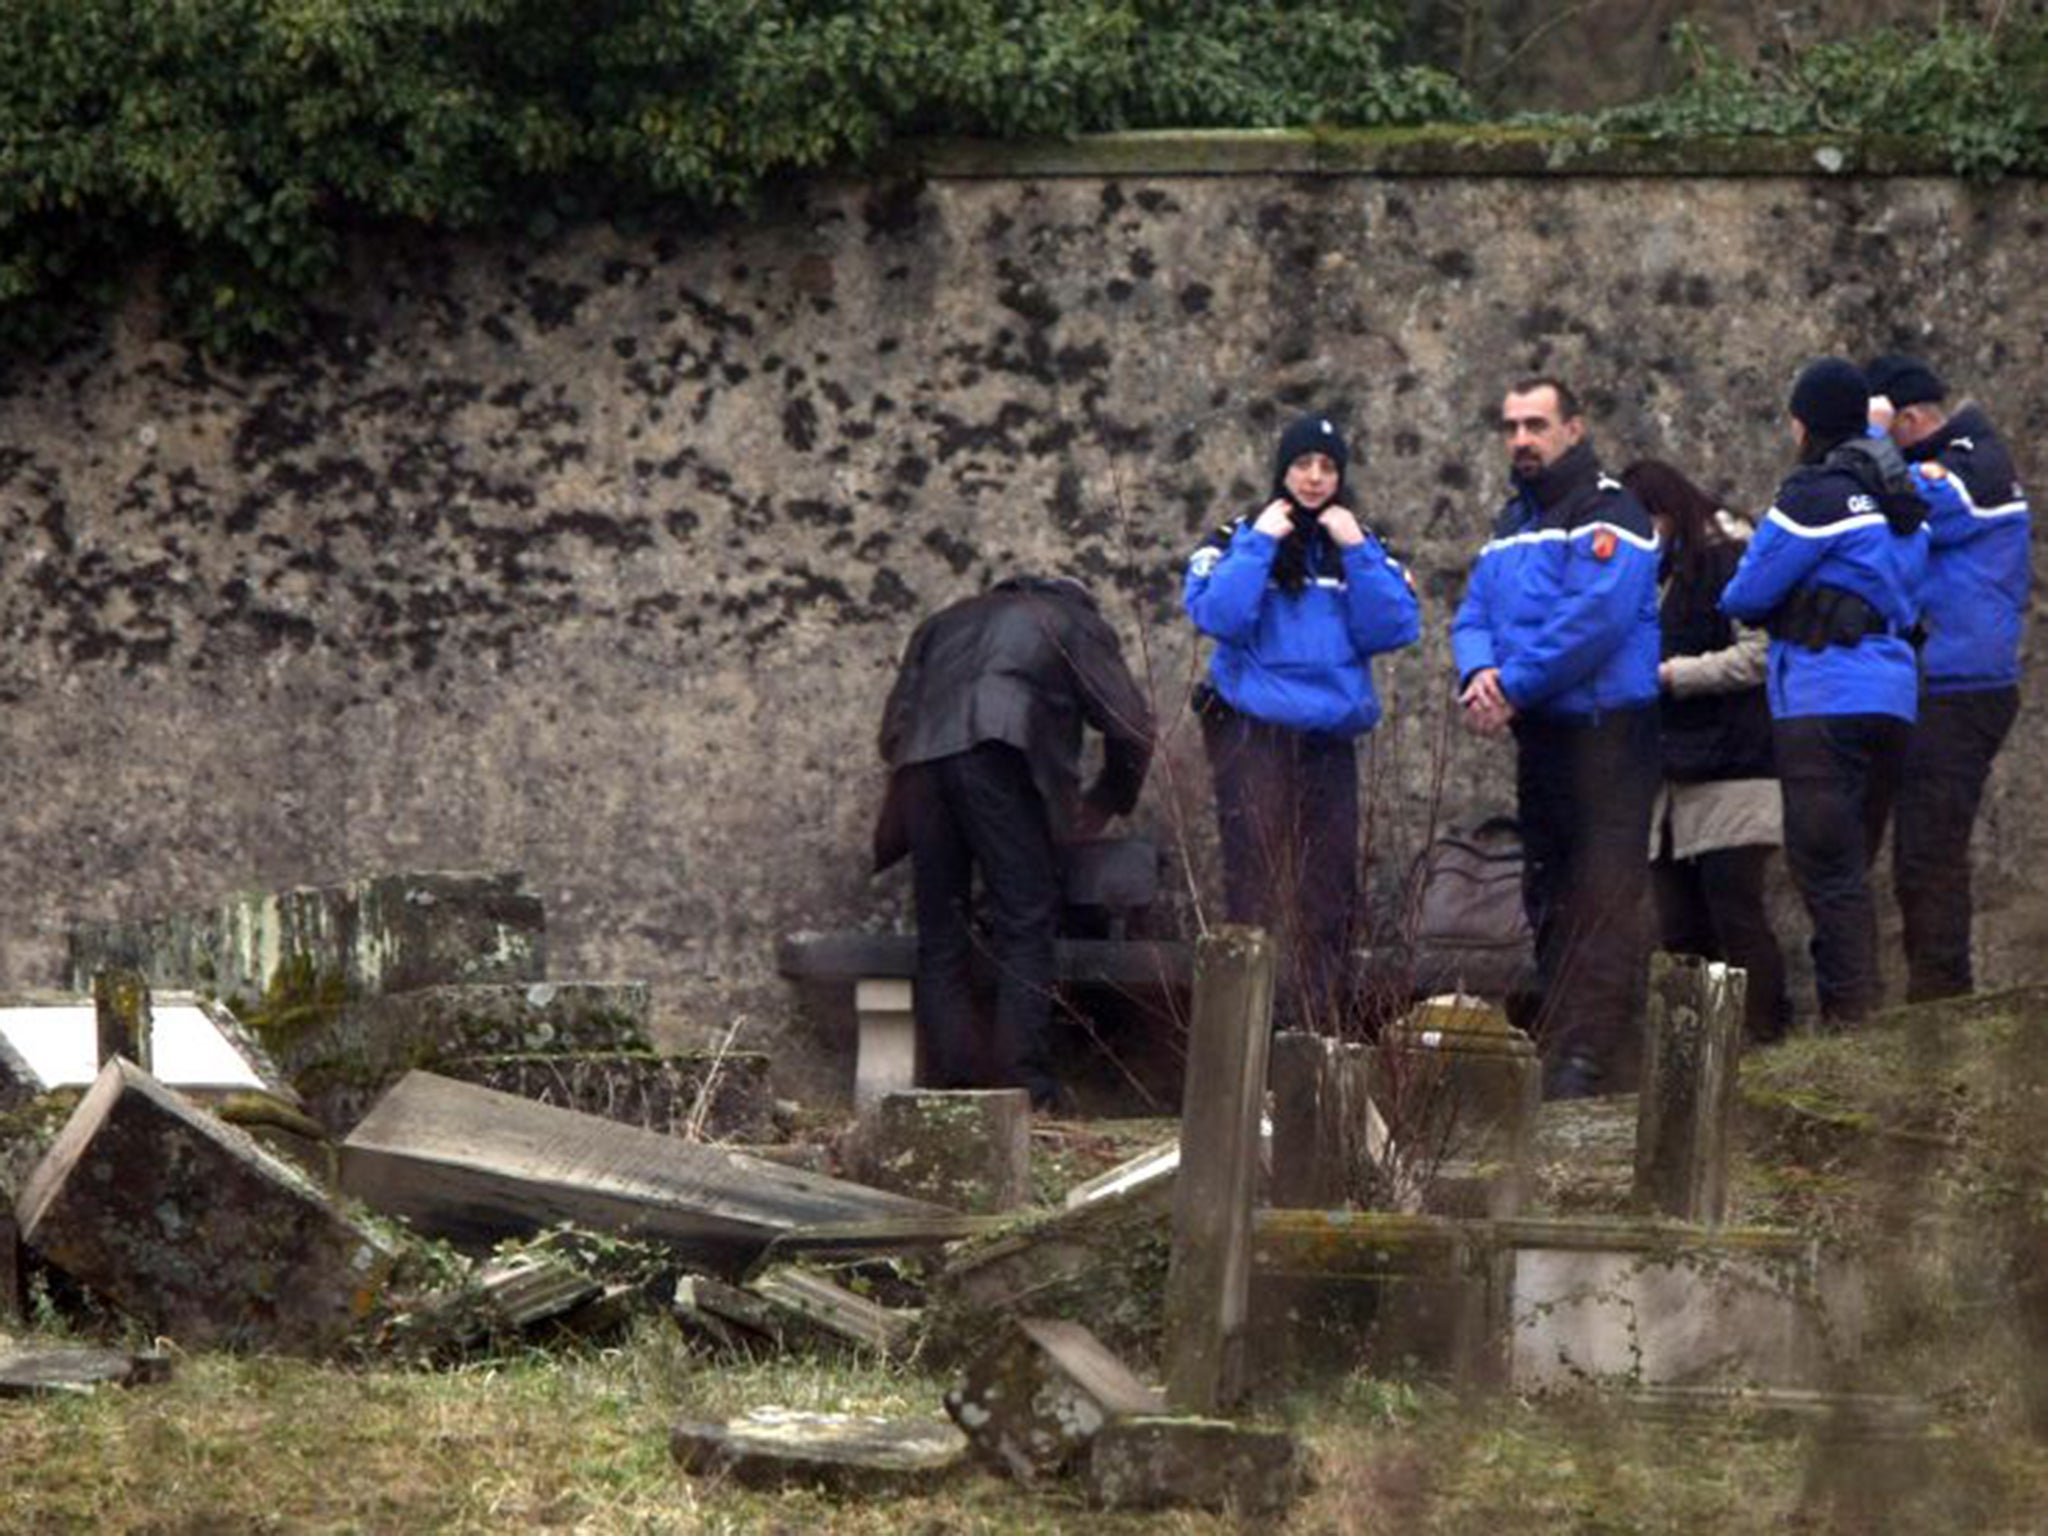 Five teenagers have been arrested in relation to the desecration of Jewish graves in a cemetery near Strasbourg